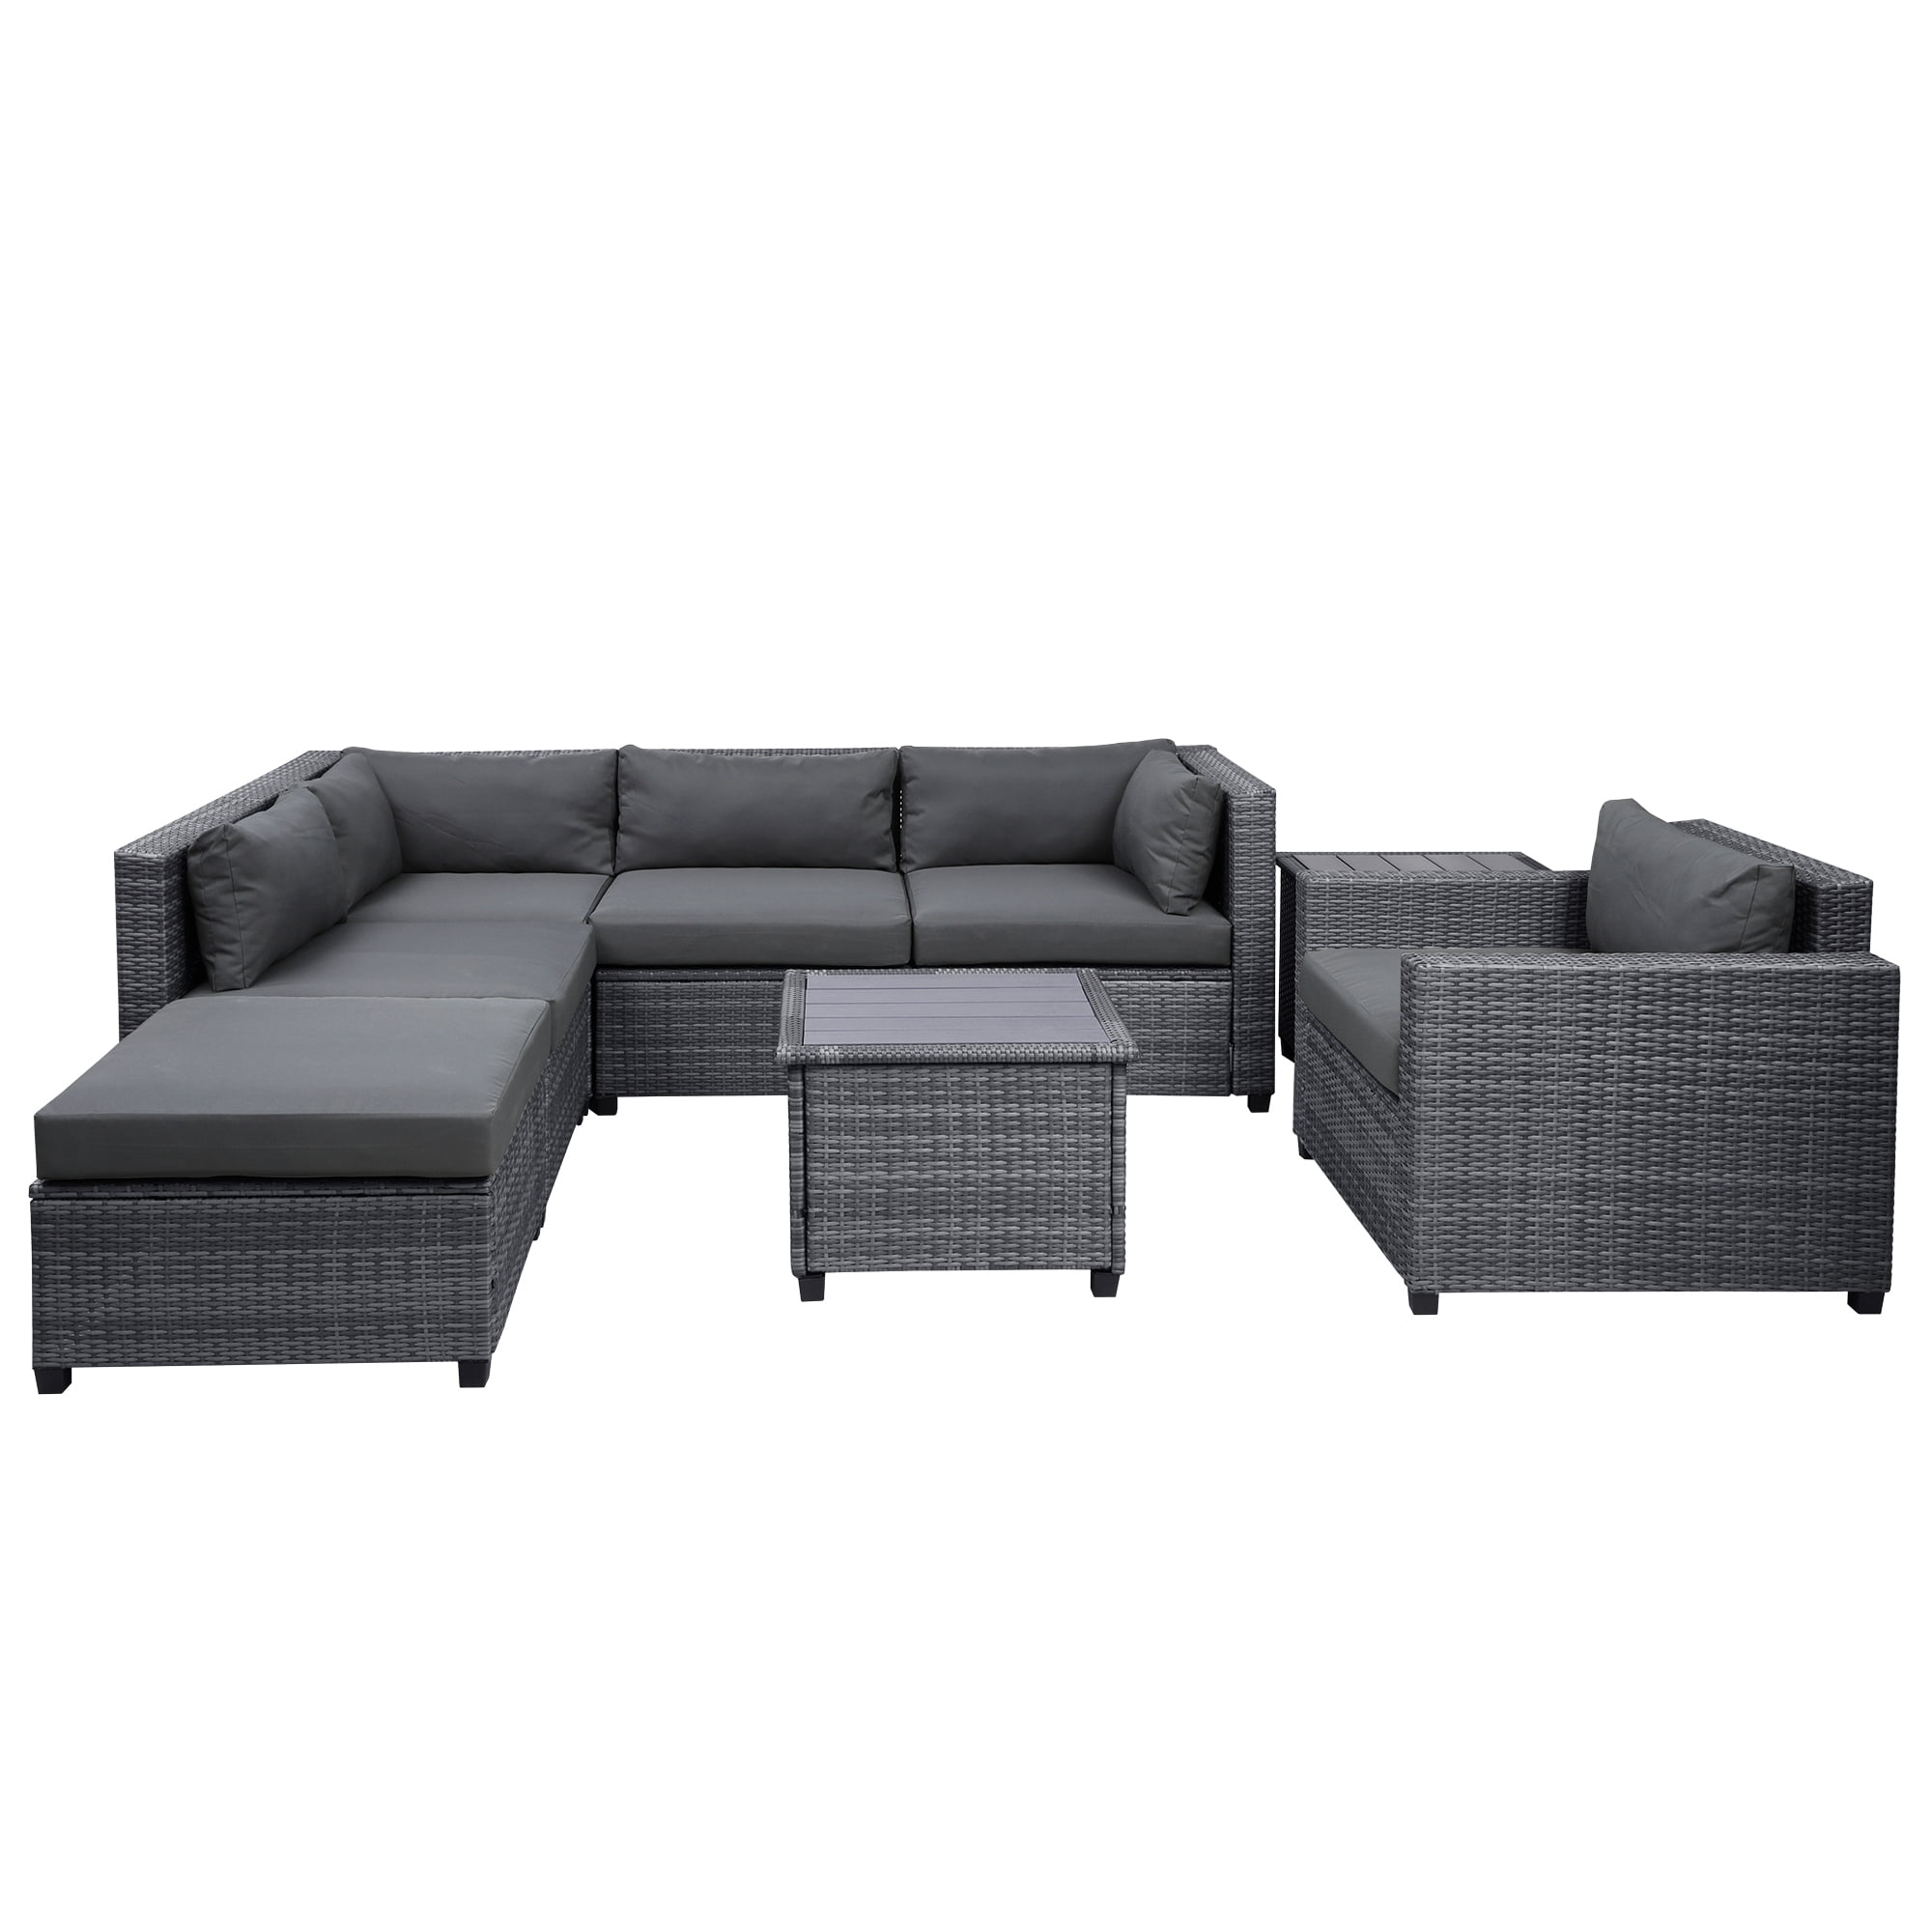 Group Sofa with Couch Set, Garden Seating Cushions 8 Conversation Set, Patio Deck Coffee Wicker Rattan for Sectional Outdoor Piece Furniture Pool All-Weather 2 & Sectional Morden Tables, Set